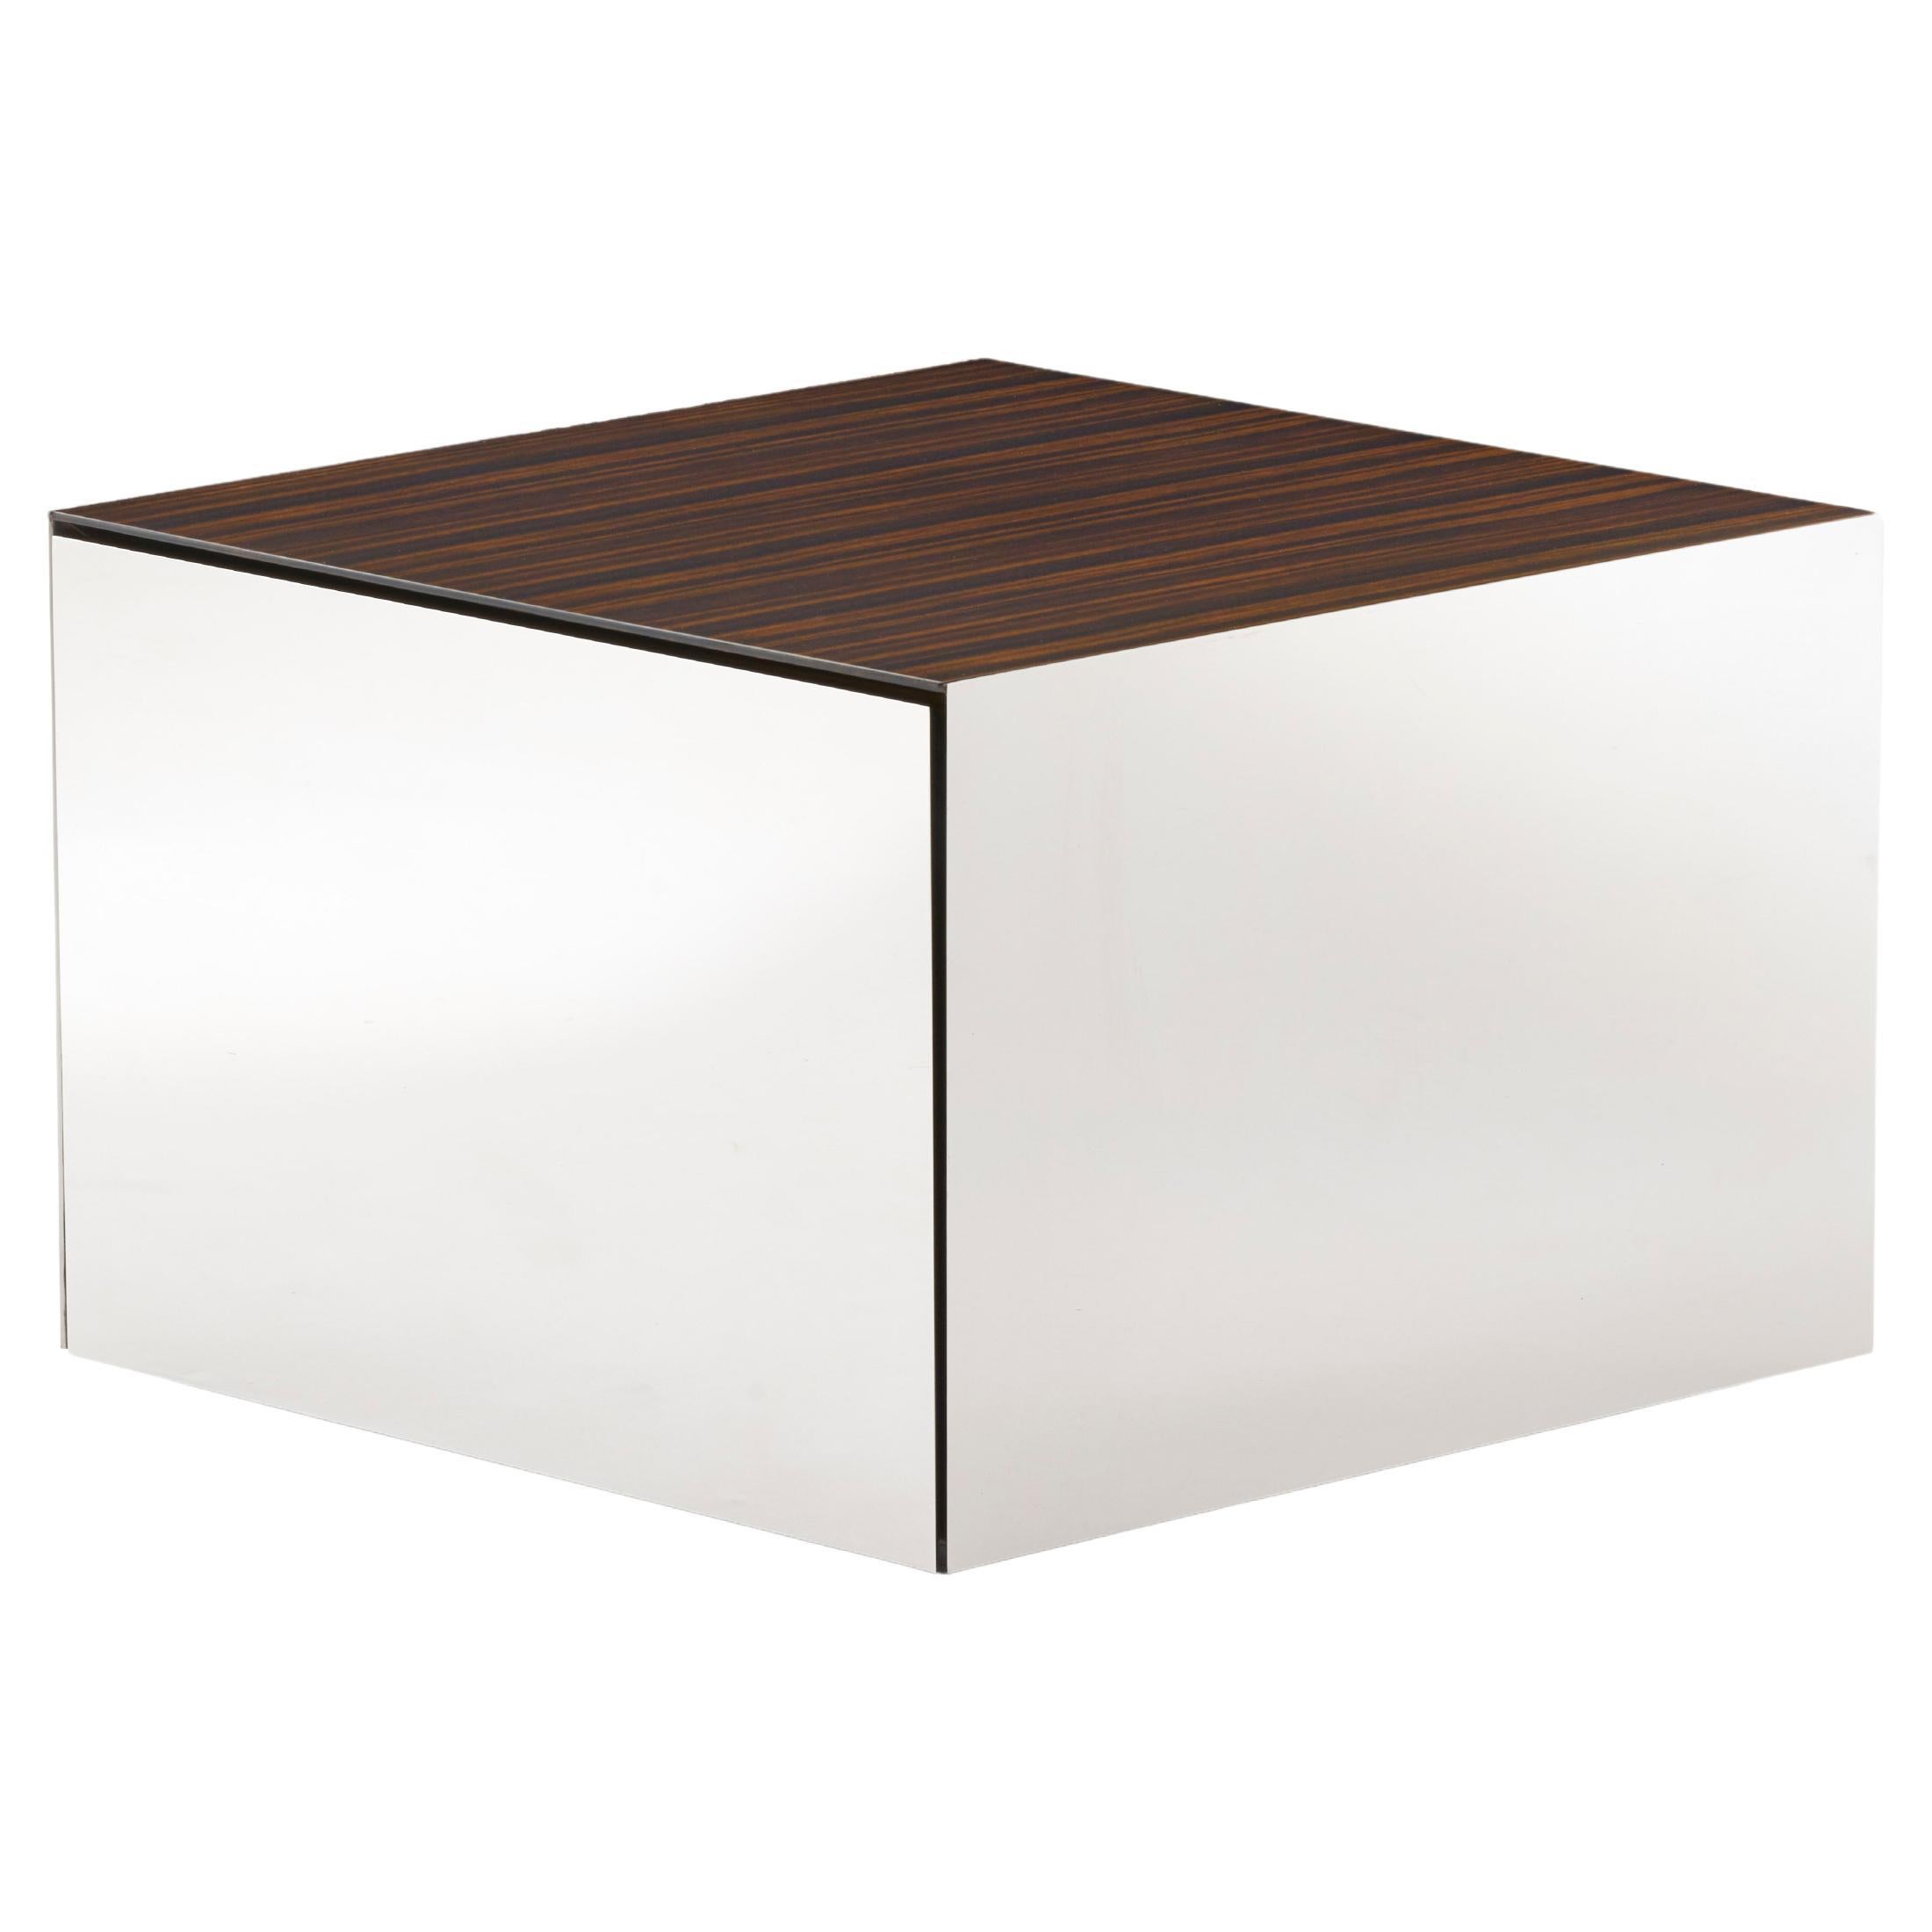 Powerful CubeTable, Side Table with Hidden Power Source in Storage Drawer